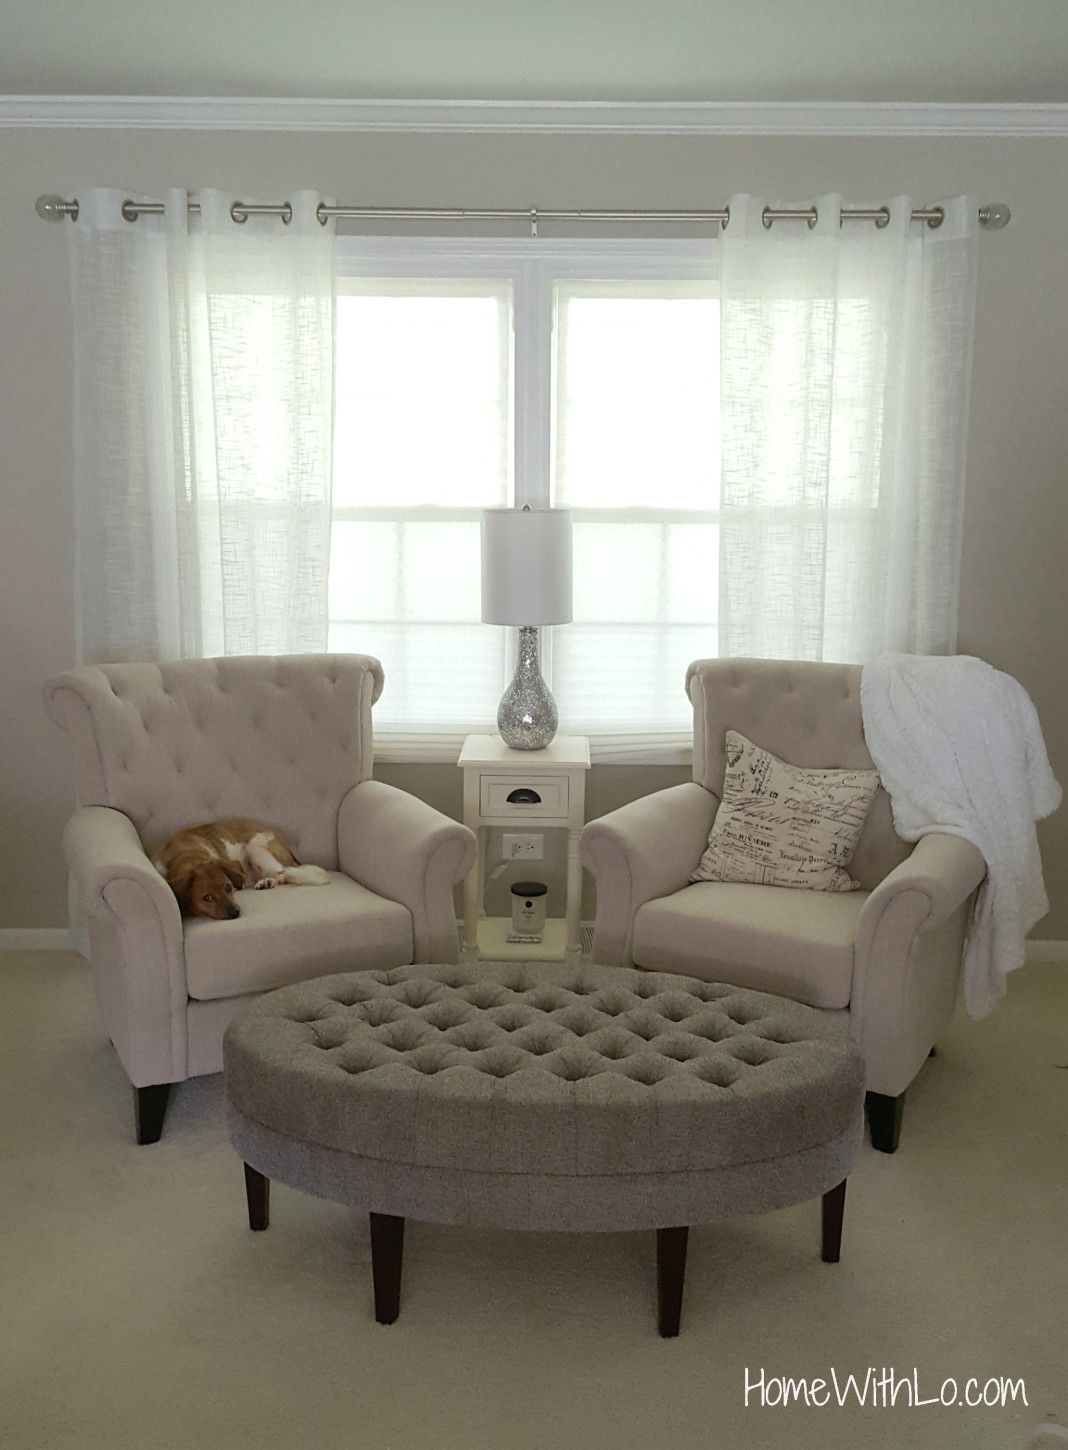 Double tufted arm chairs with tufted ottoman for a formal sitting room.  Great little reading/coffee nook for the morning! More information  including source